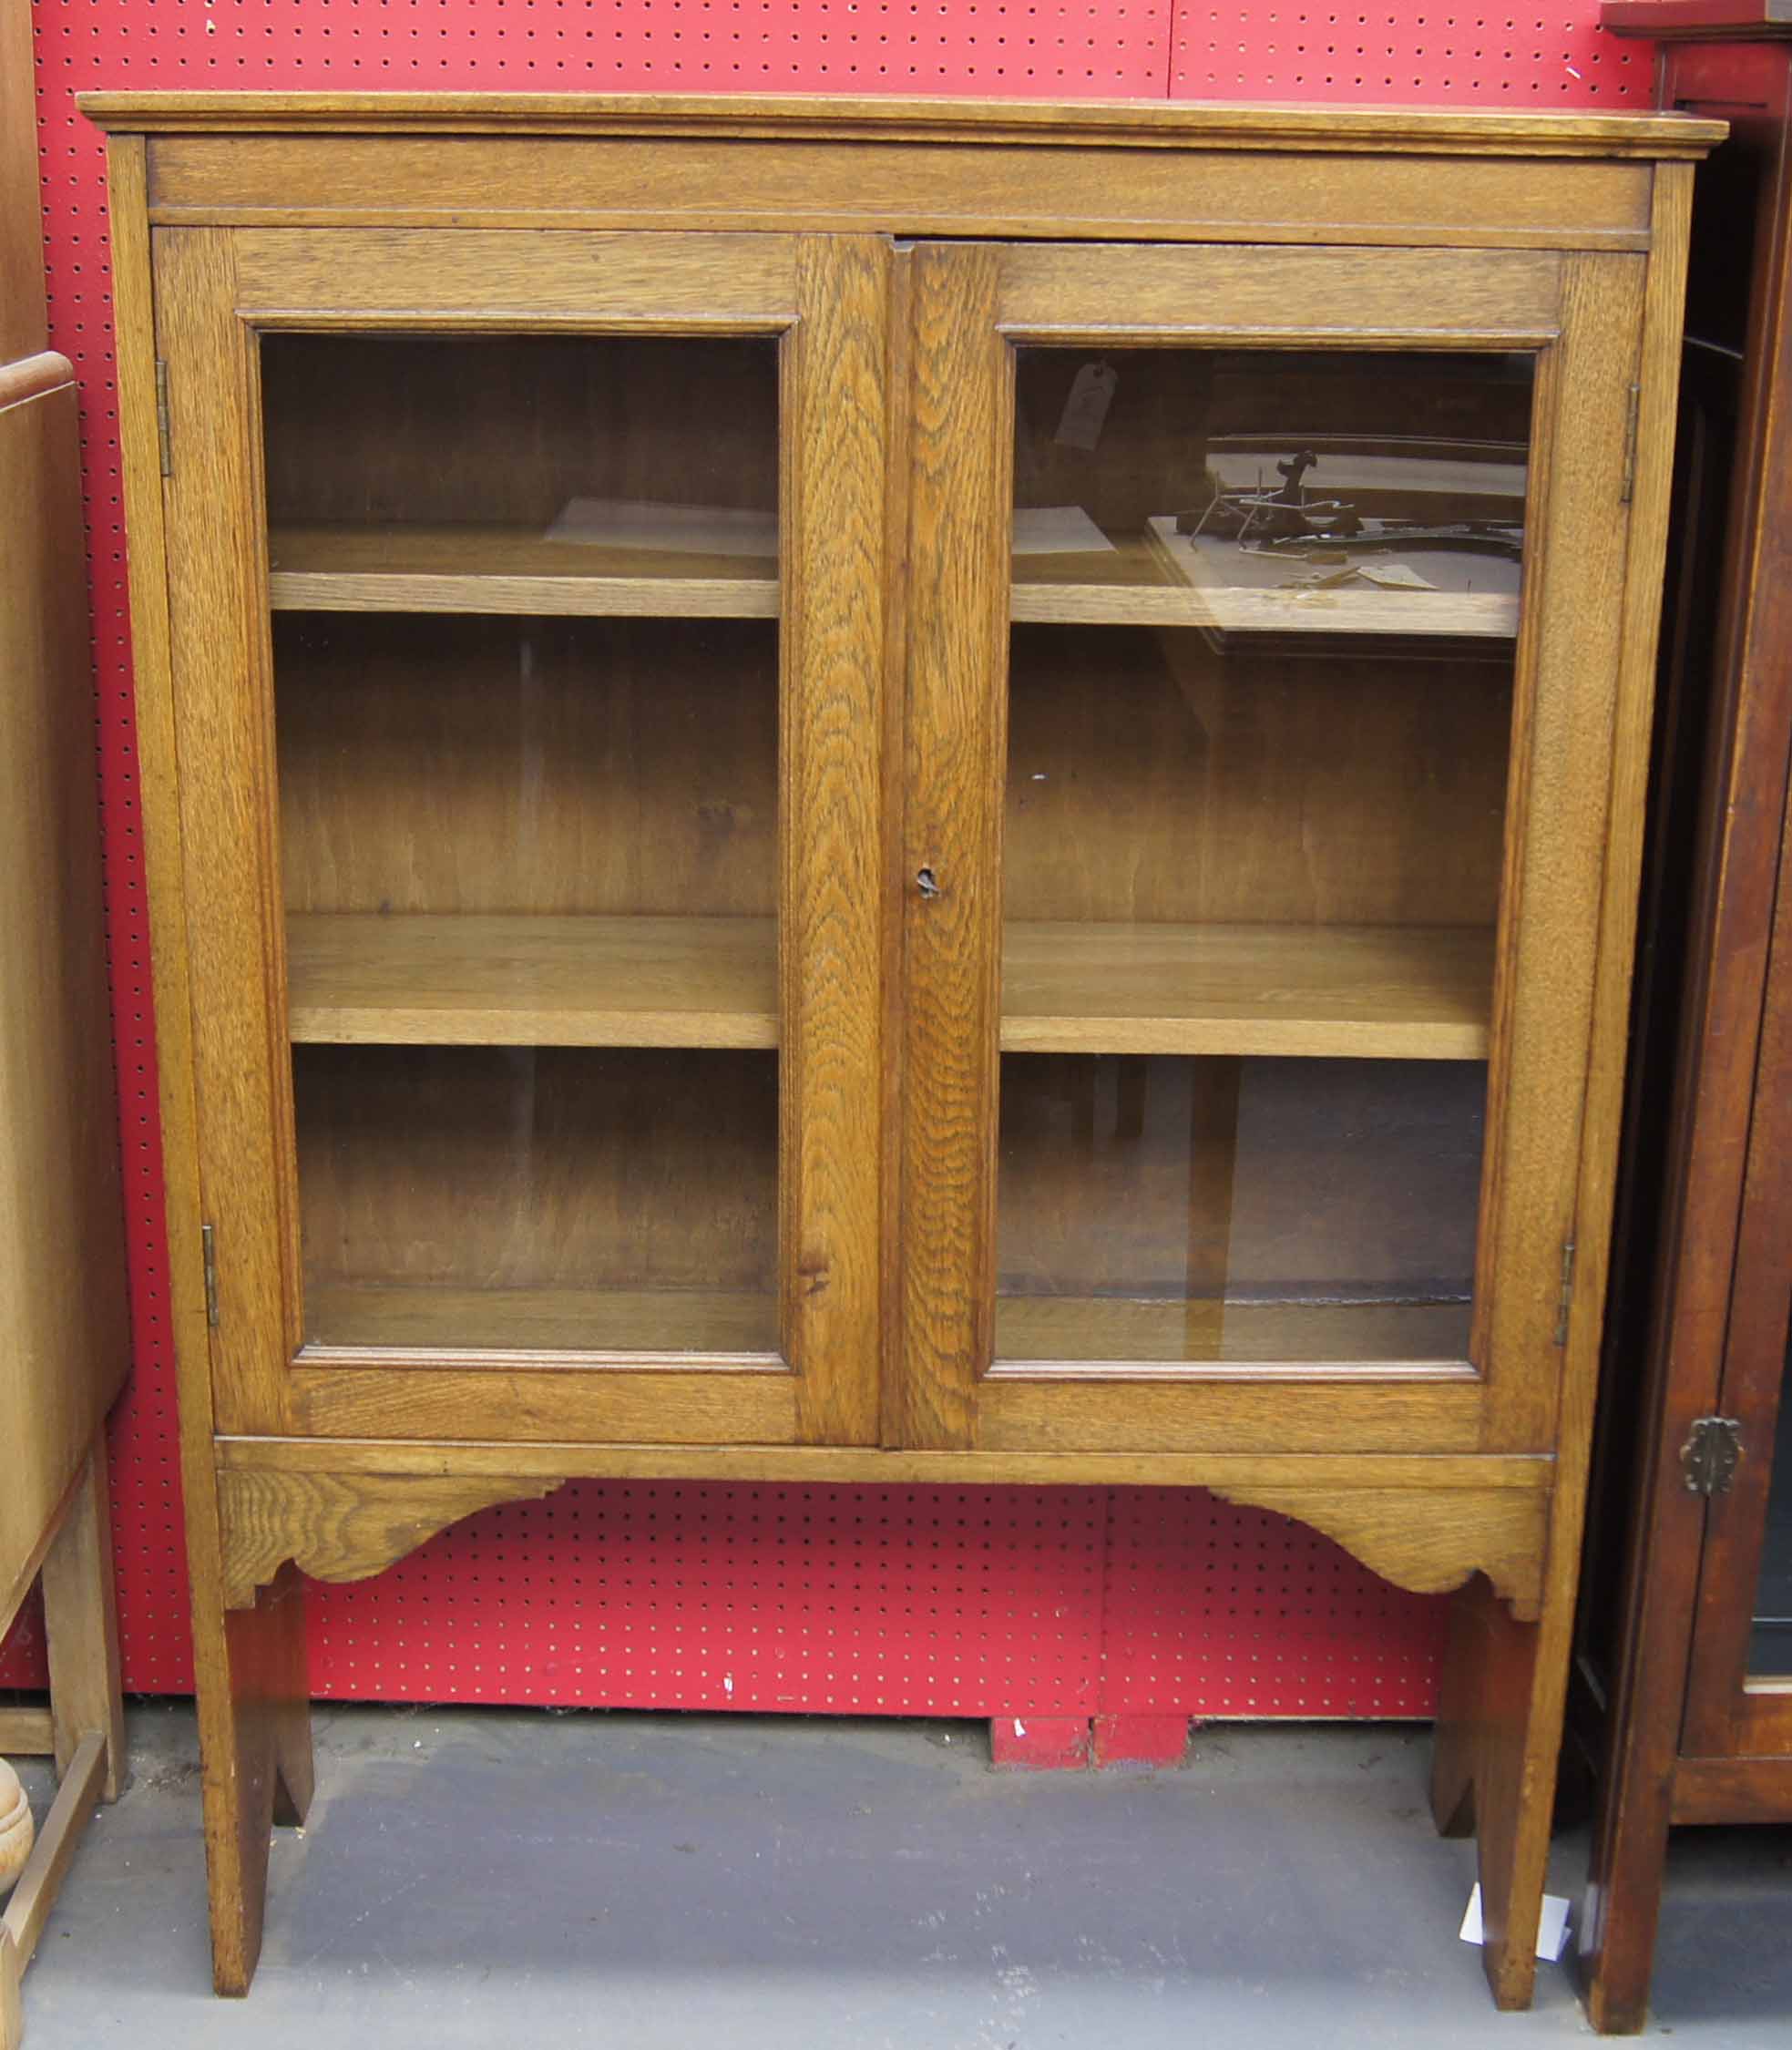 Late 19th early 20th c arts and crafts design oak book display cabinet with integral wood shelves